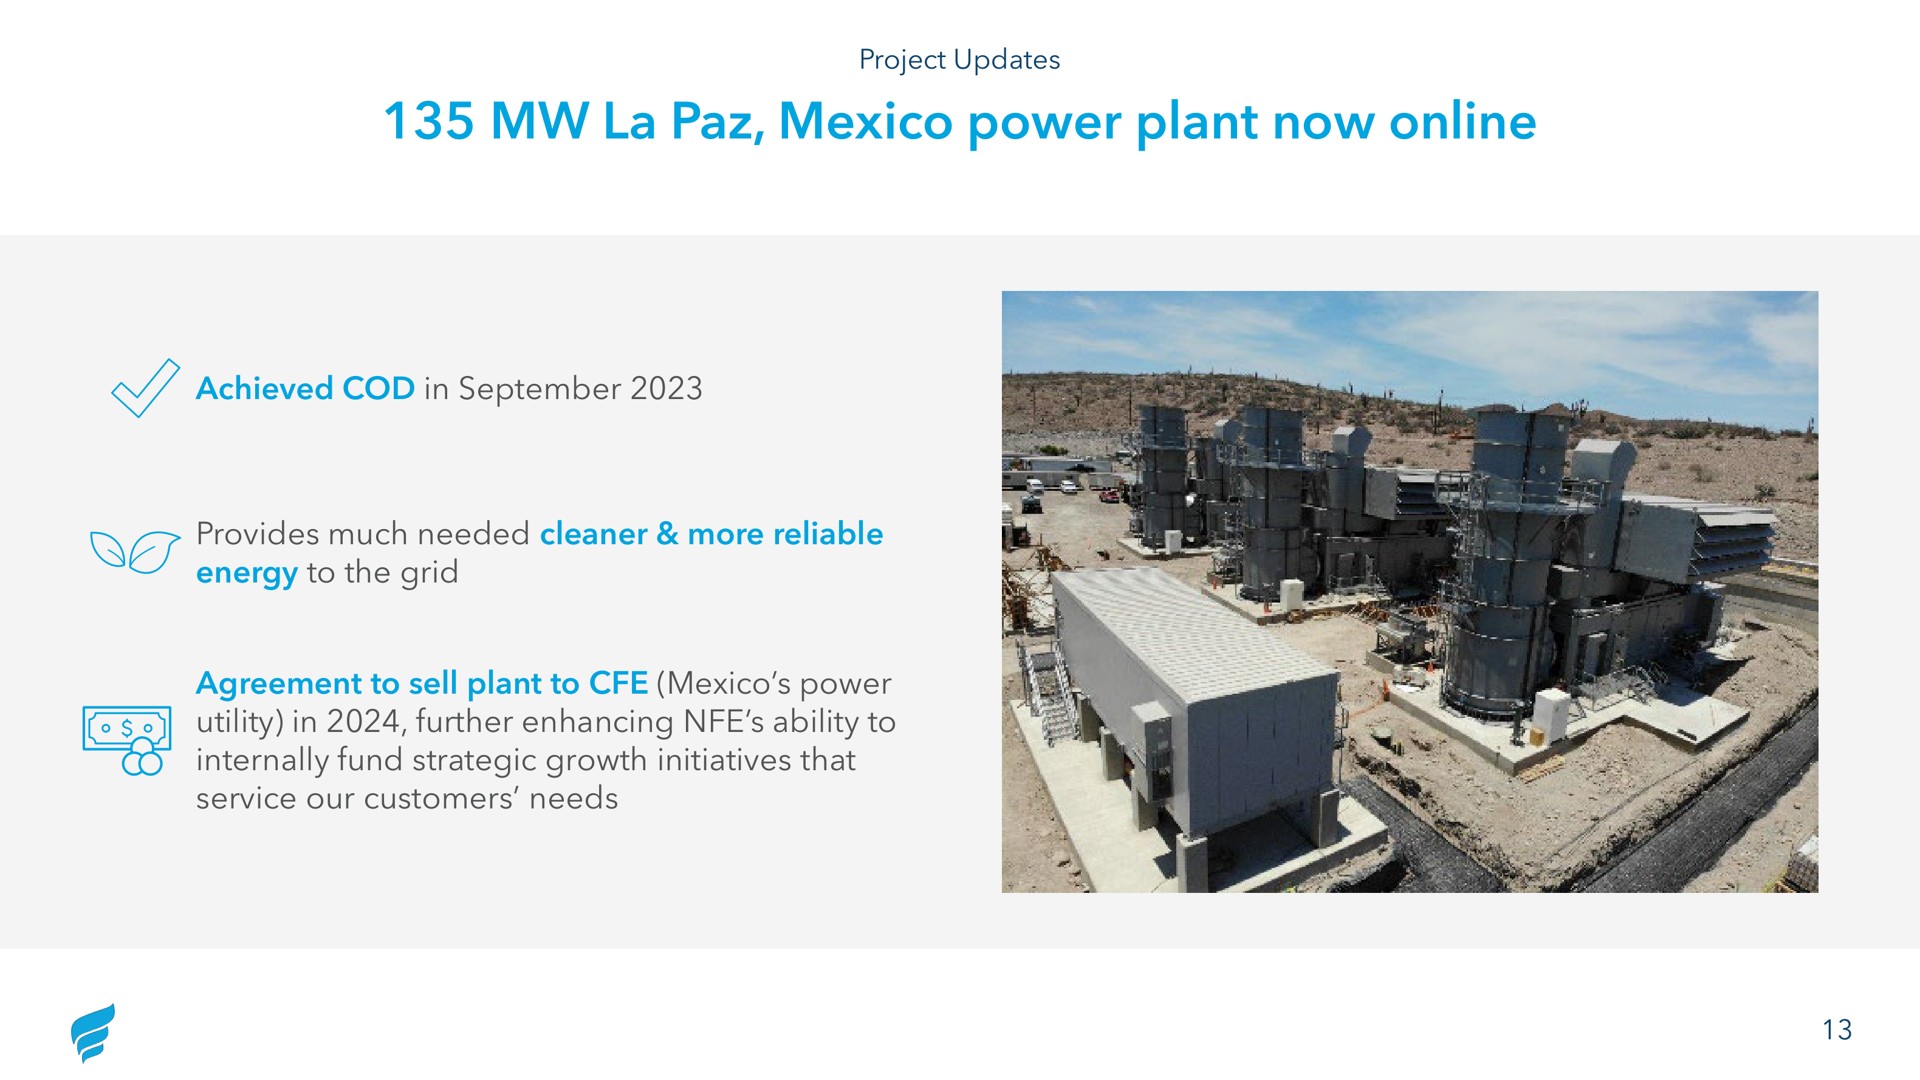 power plant now achieved cod in provides much needed cleaner more reliable energy to the grid agreement to sell plant to power utility in further enhancing ability to internally fund strategic growth initiatives that service our customers needs go | NewFortress Energy